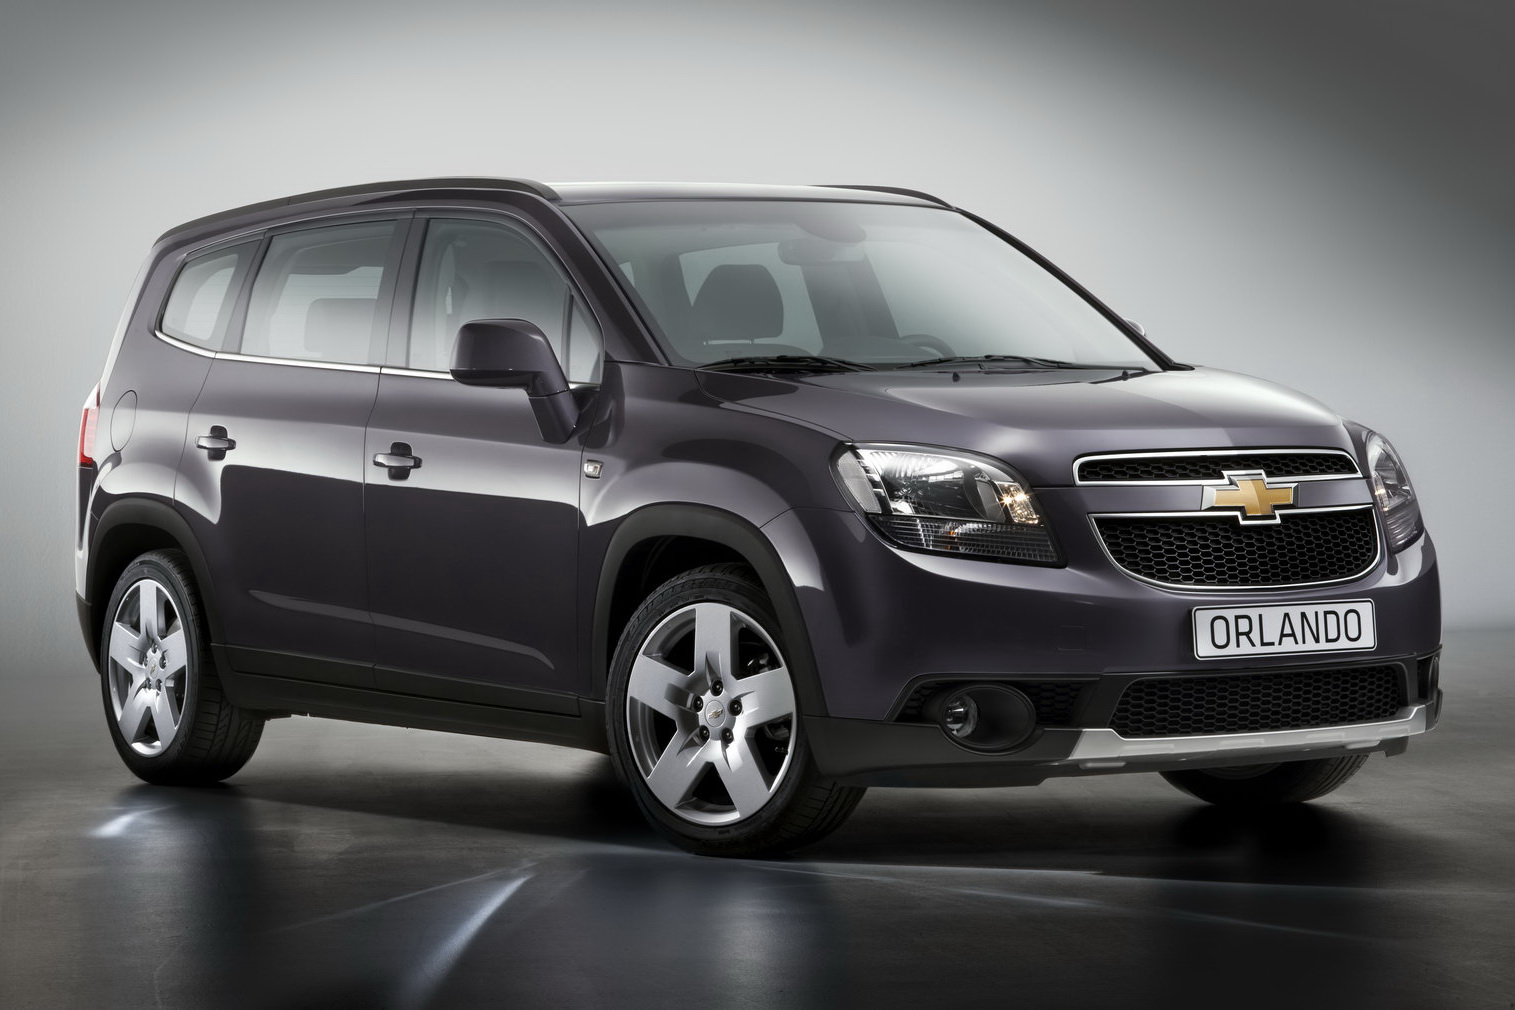 The New Chevrolet Orlando Is Not An MPV No More